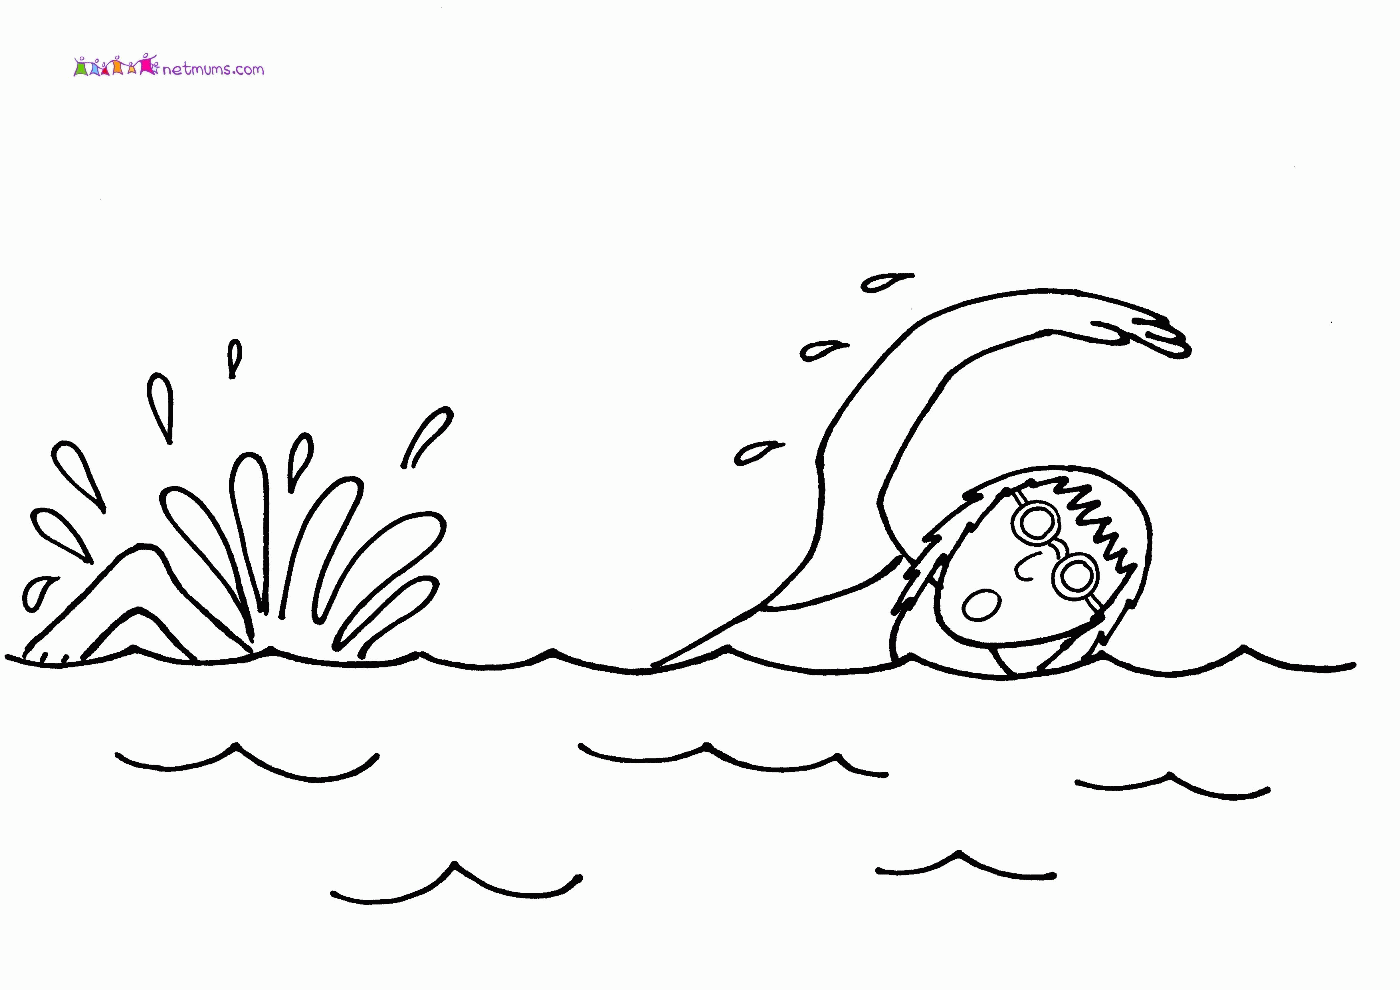 Girl Swimmer Coloring Page - Coloring Home